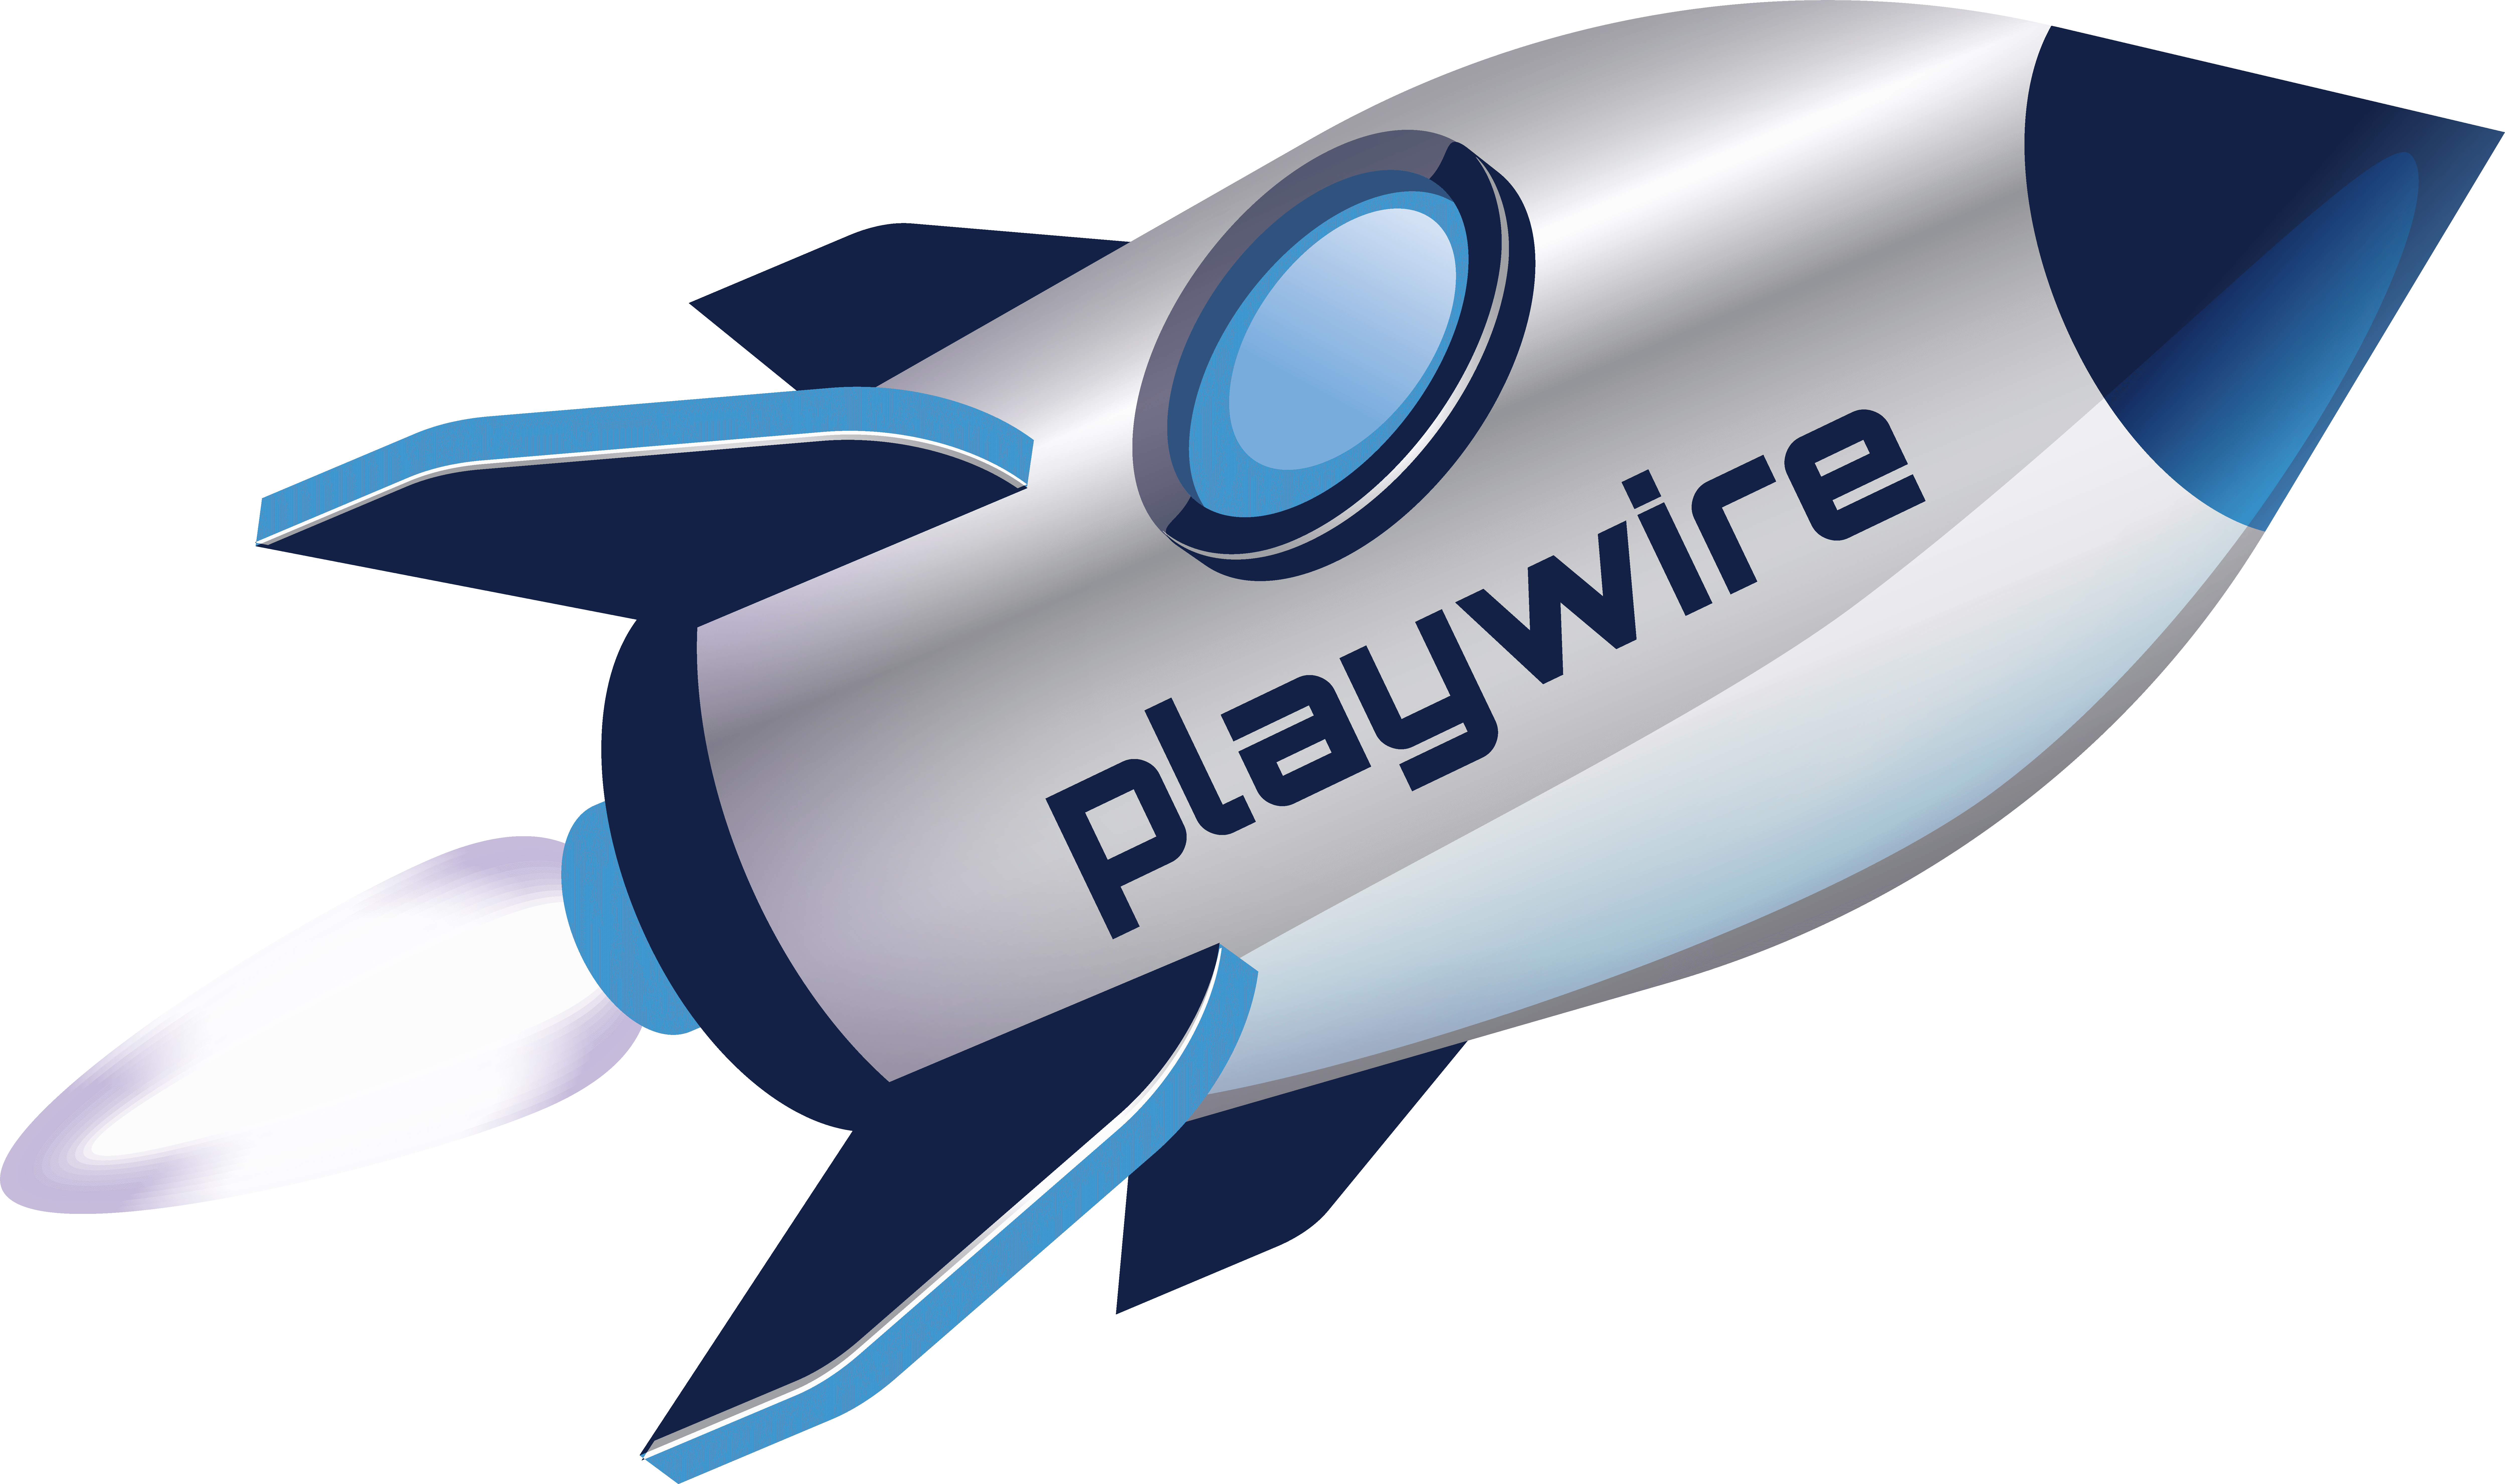 https://www.playwire.com/hubfs/2022%20Website%20Page%20Images/rocket-2.png